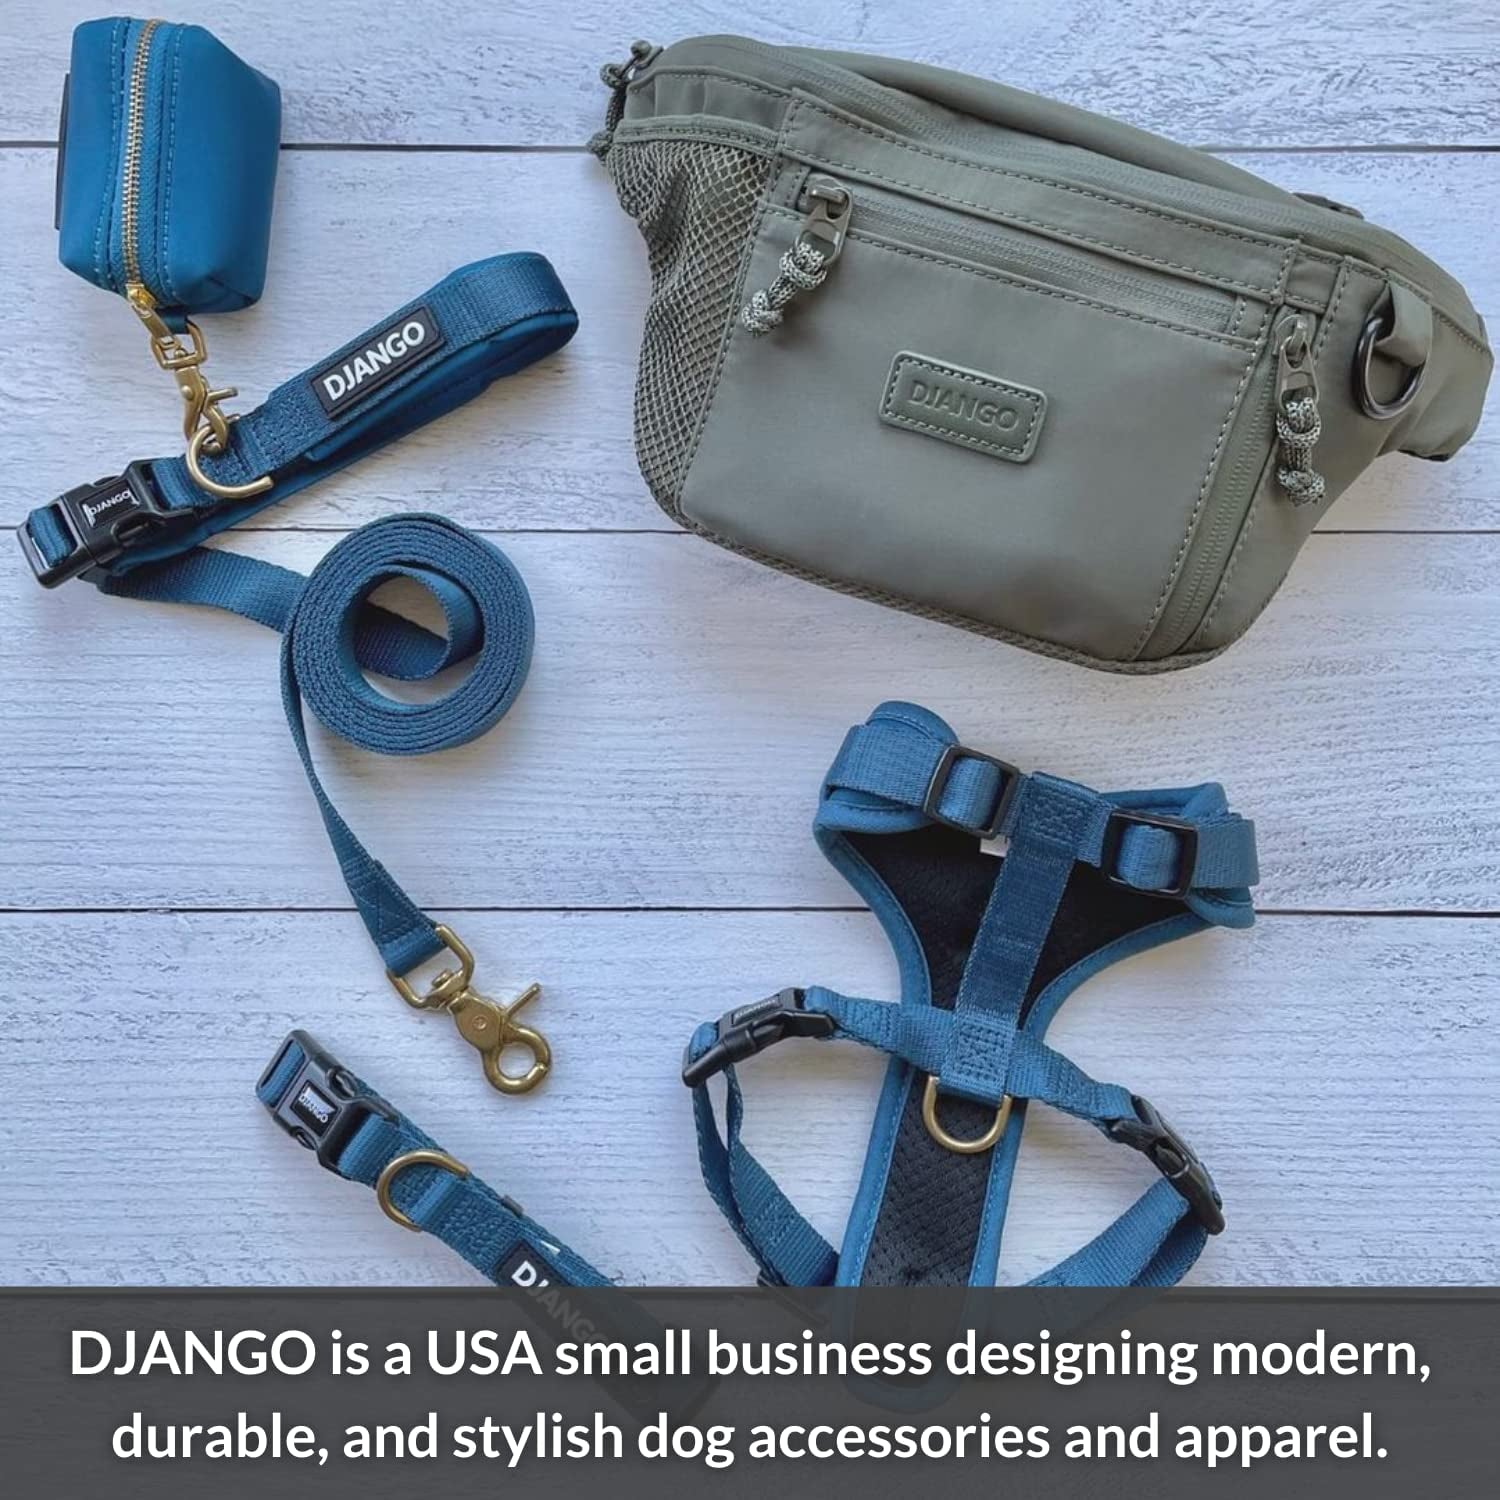 DJANGO Dog Carrier Bag - Waxed Canvas and Leather Soft-Sided Pet Travel  Tote with Bag-to-Harness Safety Tether & Secure Zipper Pockets (Medium,  Olive